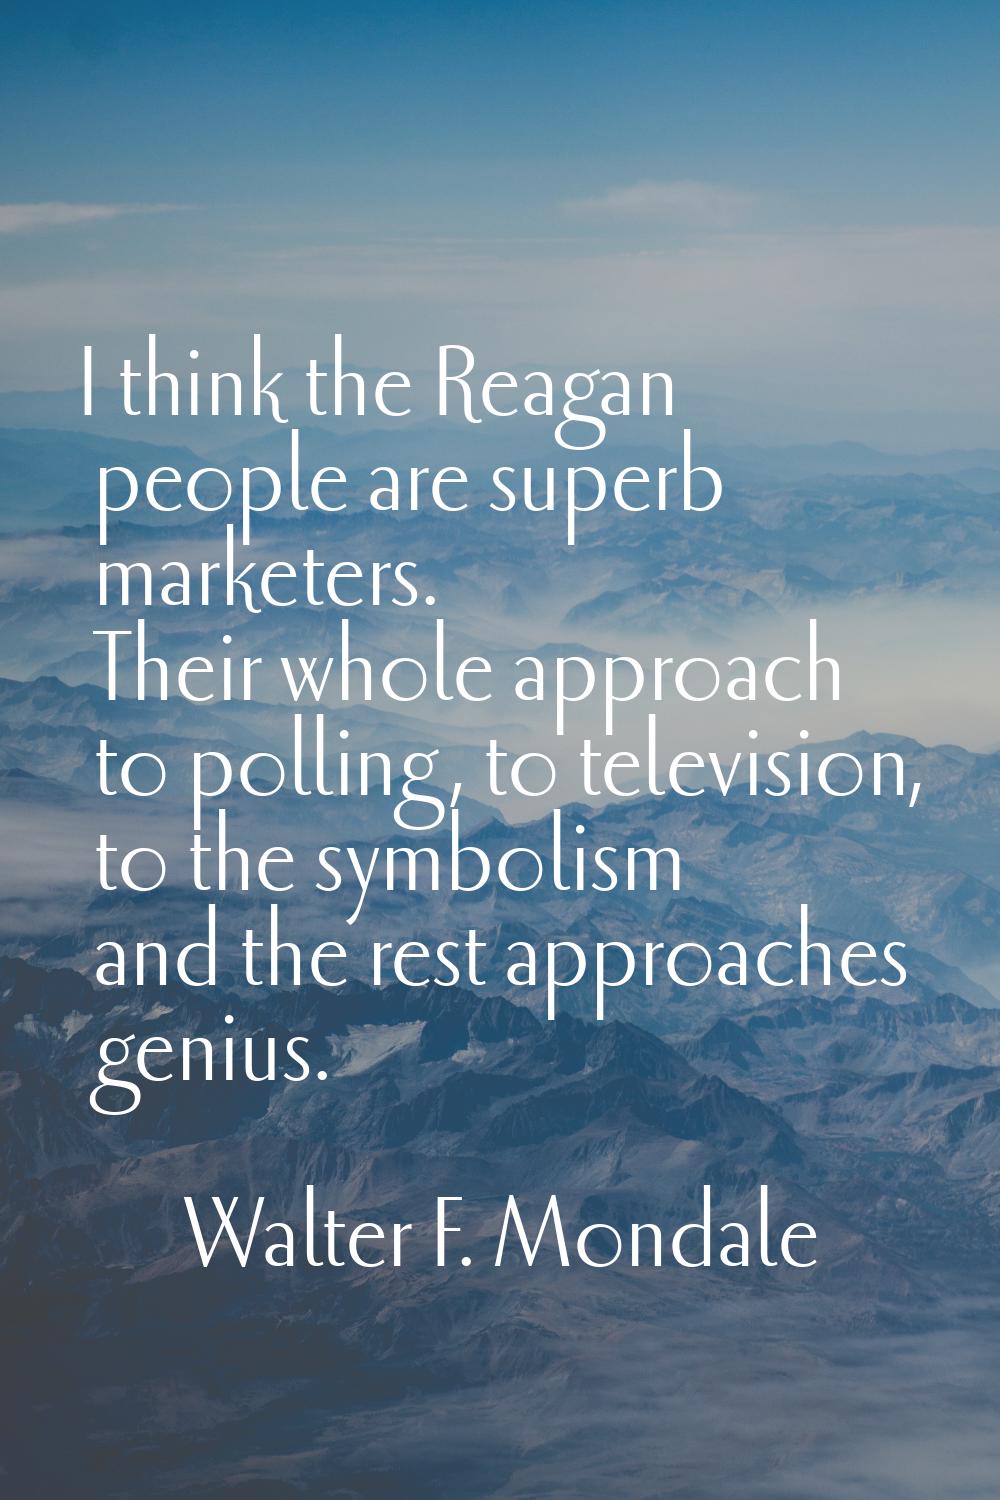 I think the Reagan people are superb marketers. Their whole approach to polling, to television, to 